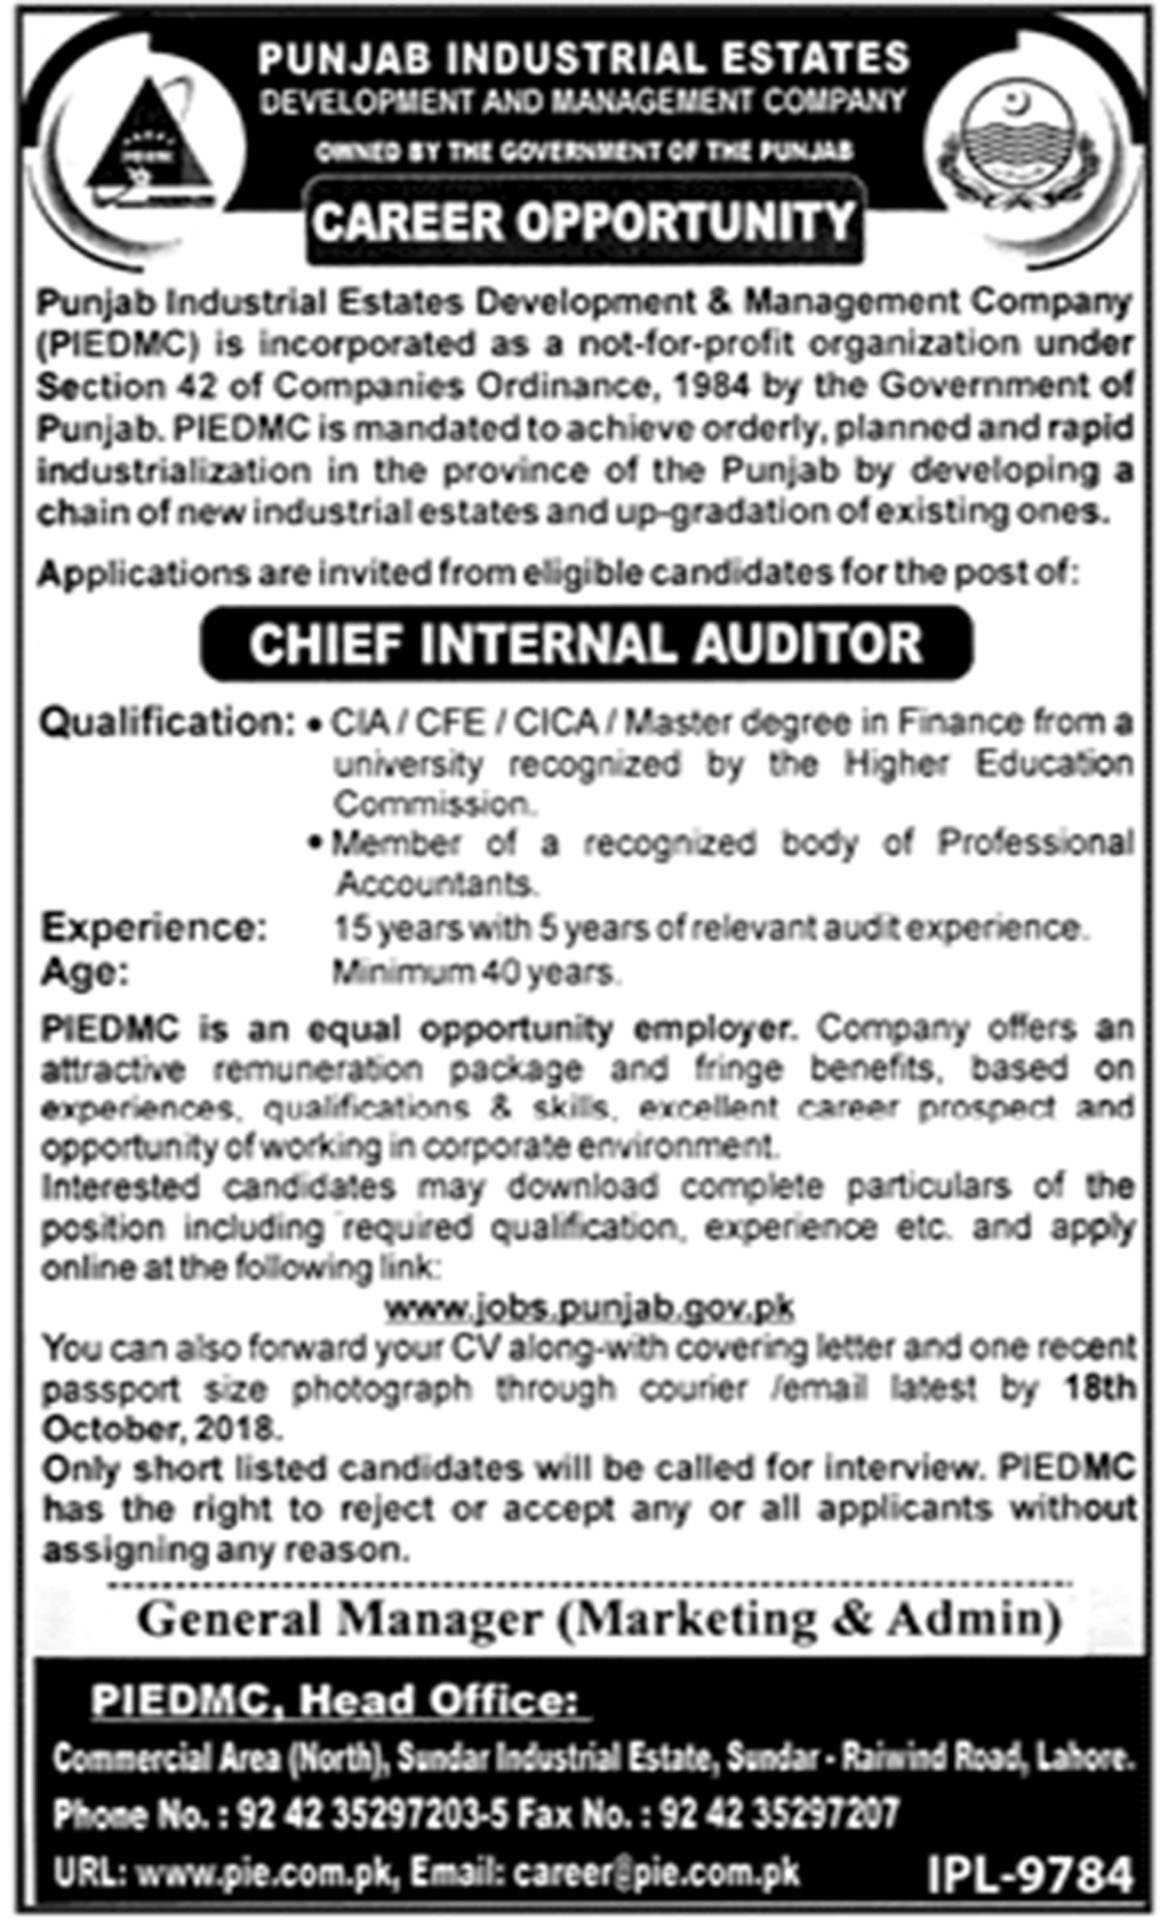 Jobs In Punjab Industrial Estate Development And Management Company PIE 06 Oct 2018